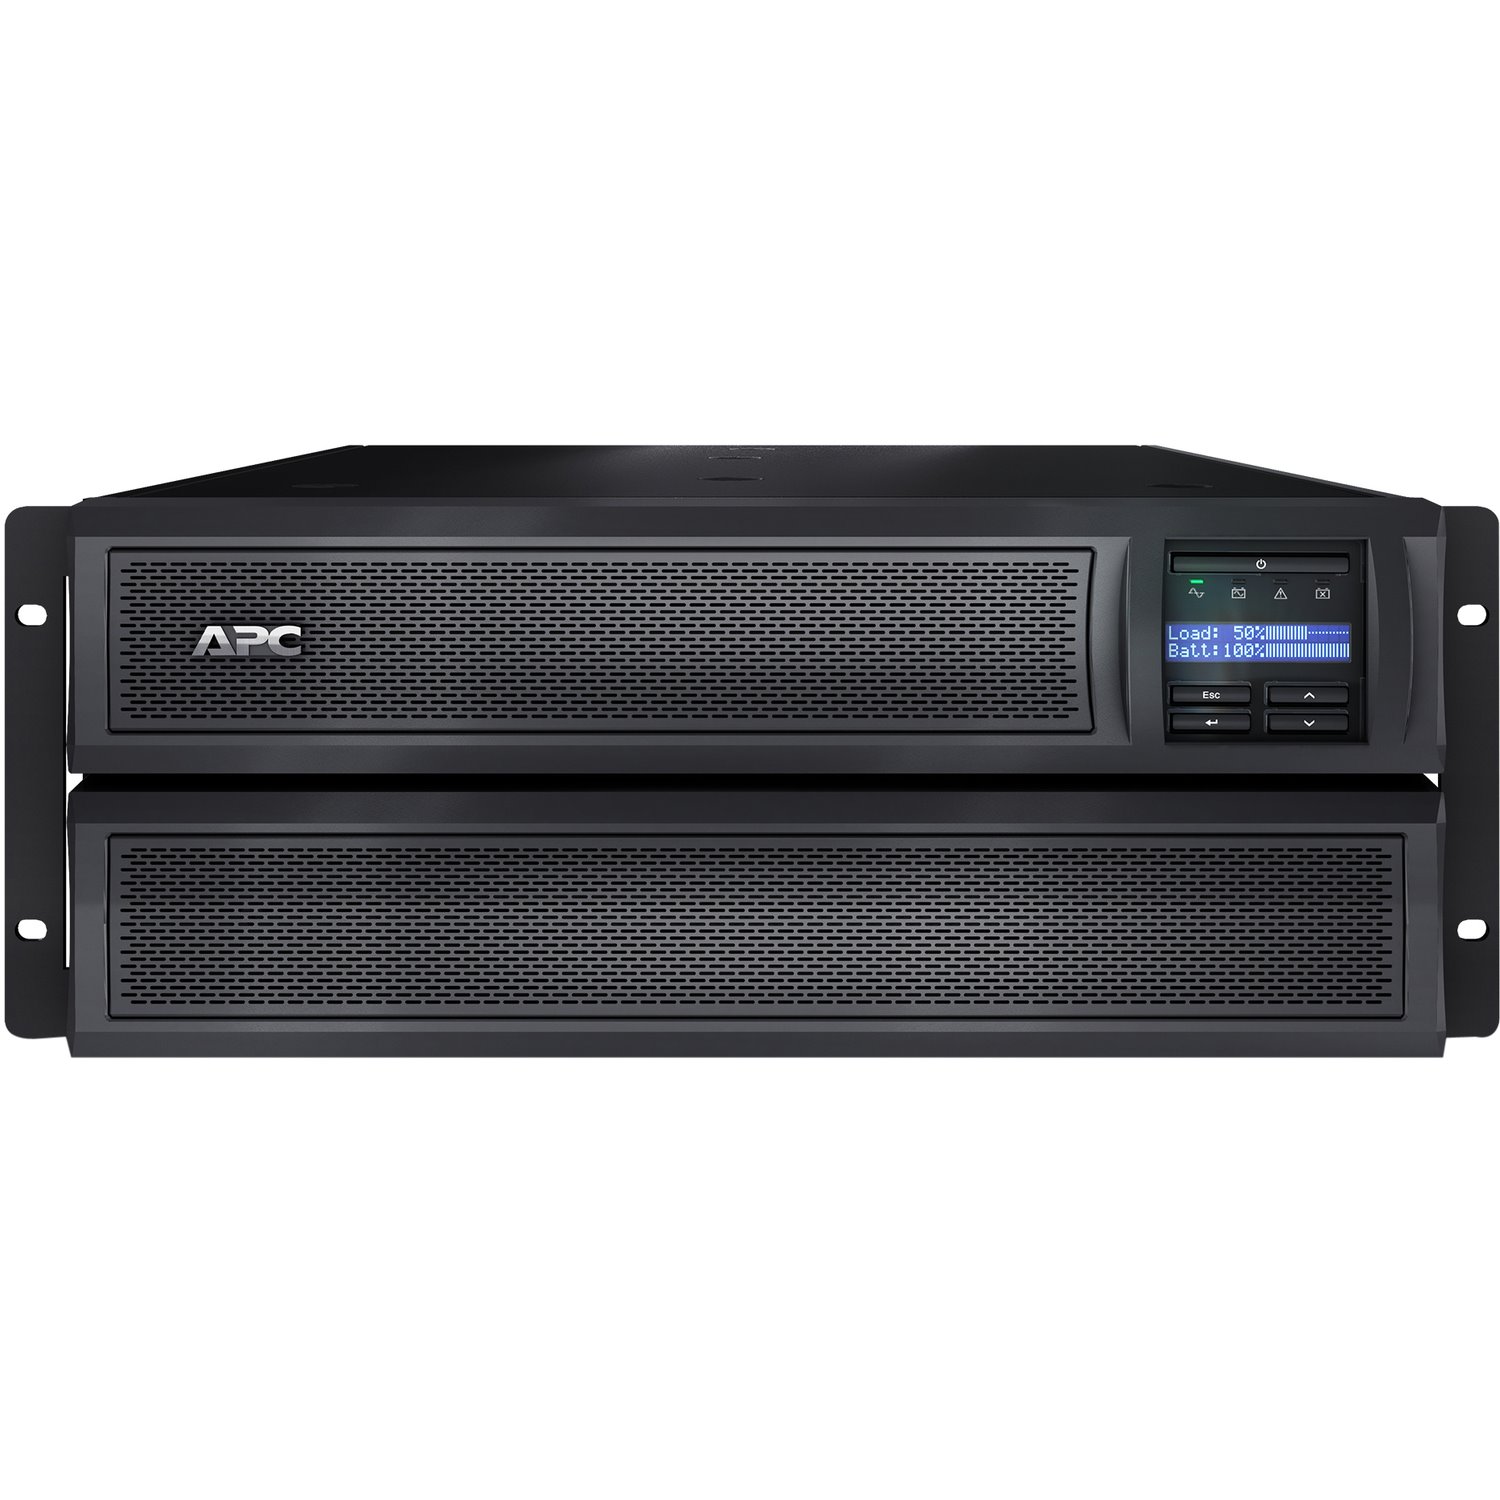 SMX3000HV - APC by Schneider Electric Smart-UPS Line-interactive UPS - 3kVA / 2.7kW.  Includes Front Support Brackets as standard ONLY. Recommend purchasing 4 post rail kit to support front and rear of UPS (SU032A)